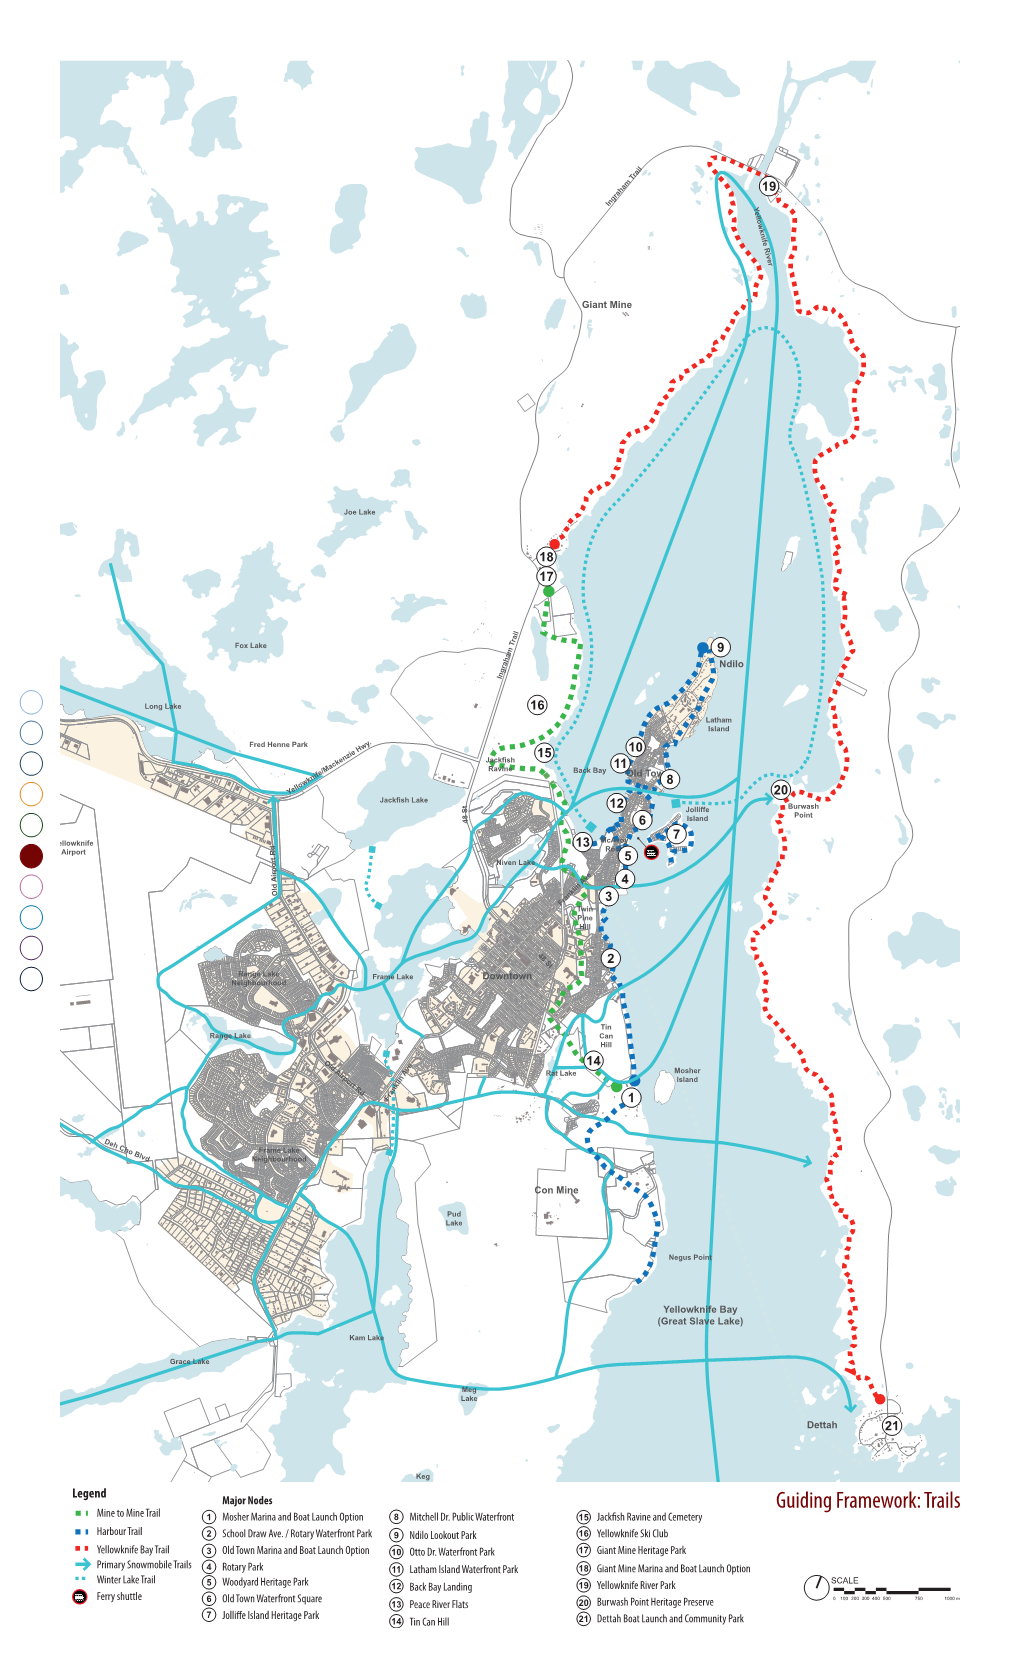 Framework for Trails Identifies Three Primary Trails: Mine to Mine, Harbour Trail and Yellowknife Bay Trail